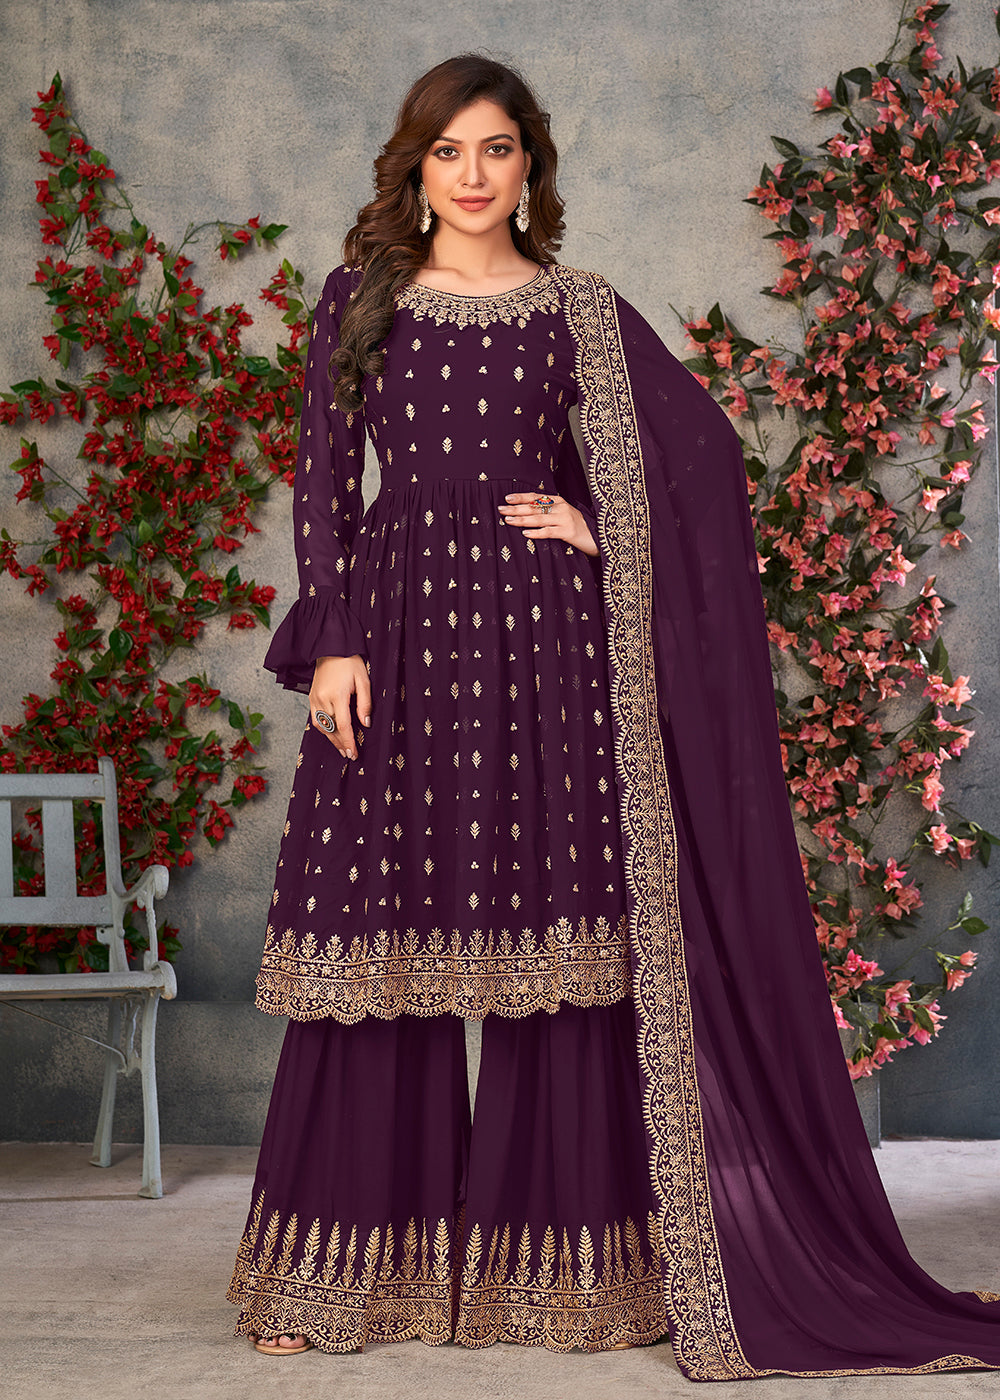 Shop Now Tempting Purple Georgette Sangeet Wear Sharara Suit Online at Empress Clothing in USA, UK, Canada, Germany & Worldwide.